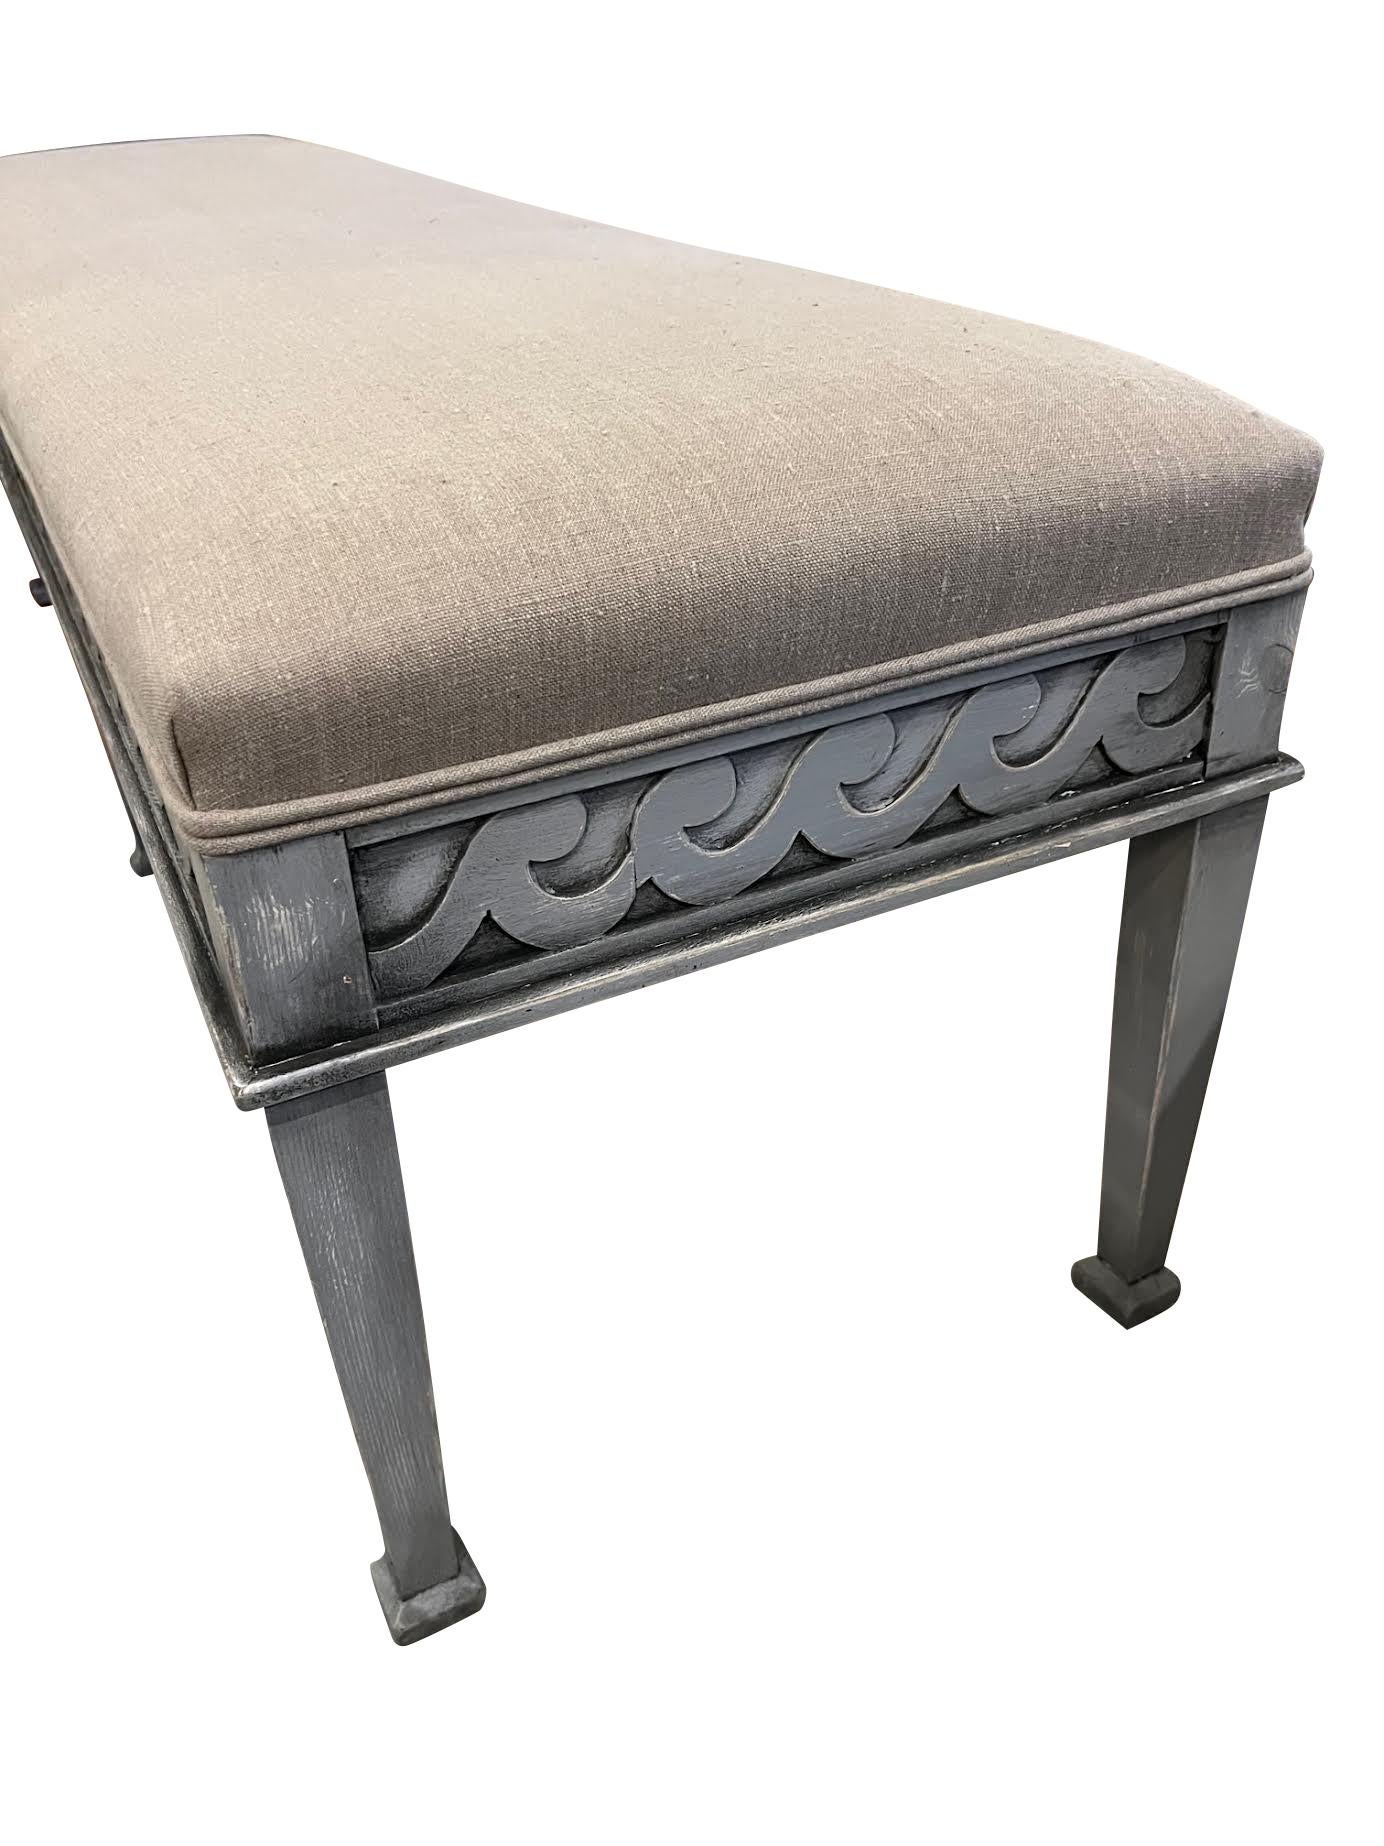 English Grey Painted and Upholstered Gustavian Style Bench, England, Contemporary For Sale